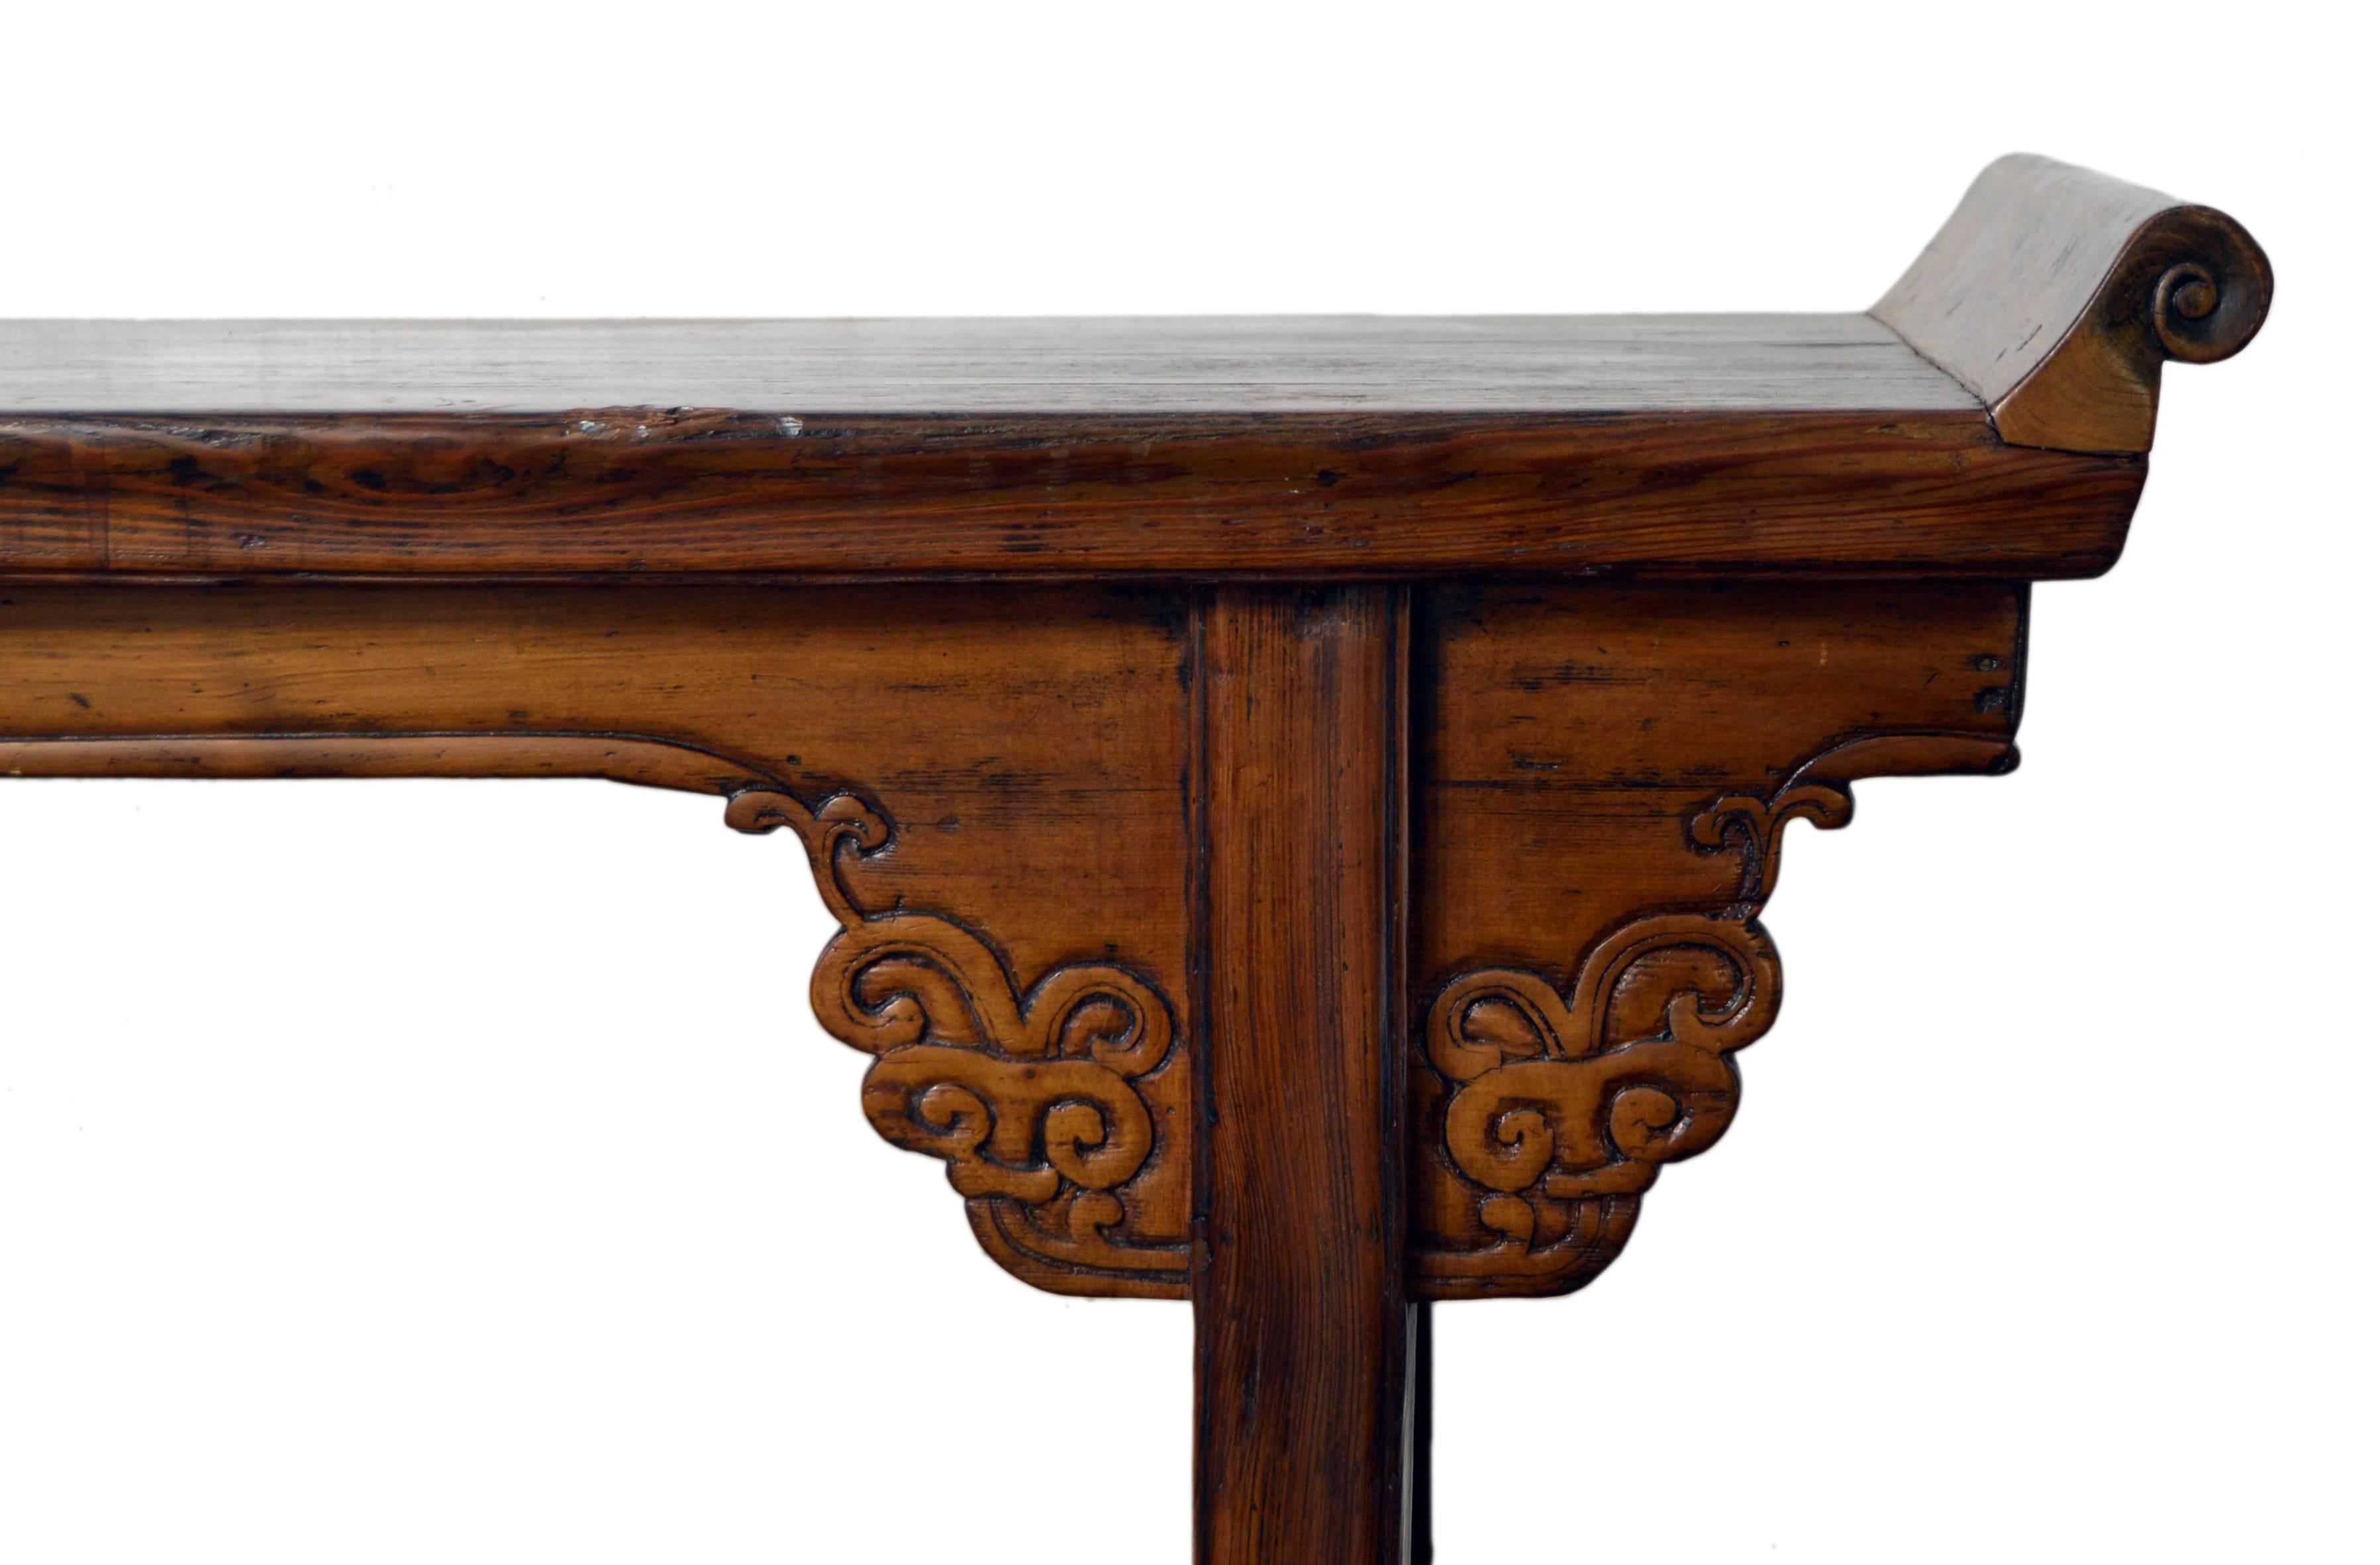 An antique Chinese wooden everted-flange altar console table from the 19th century with hand-carved scrolling motifs. This narrow Chinese altar table features a rectangular planked top, flanked with exquisite everted scrolling flanges. Our eye is